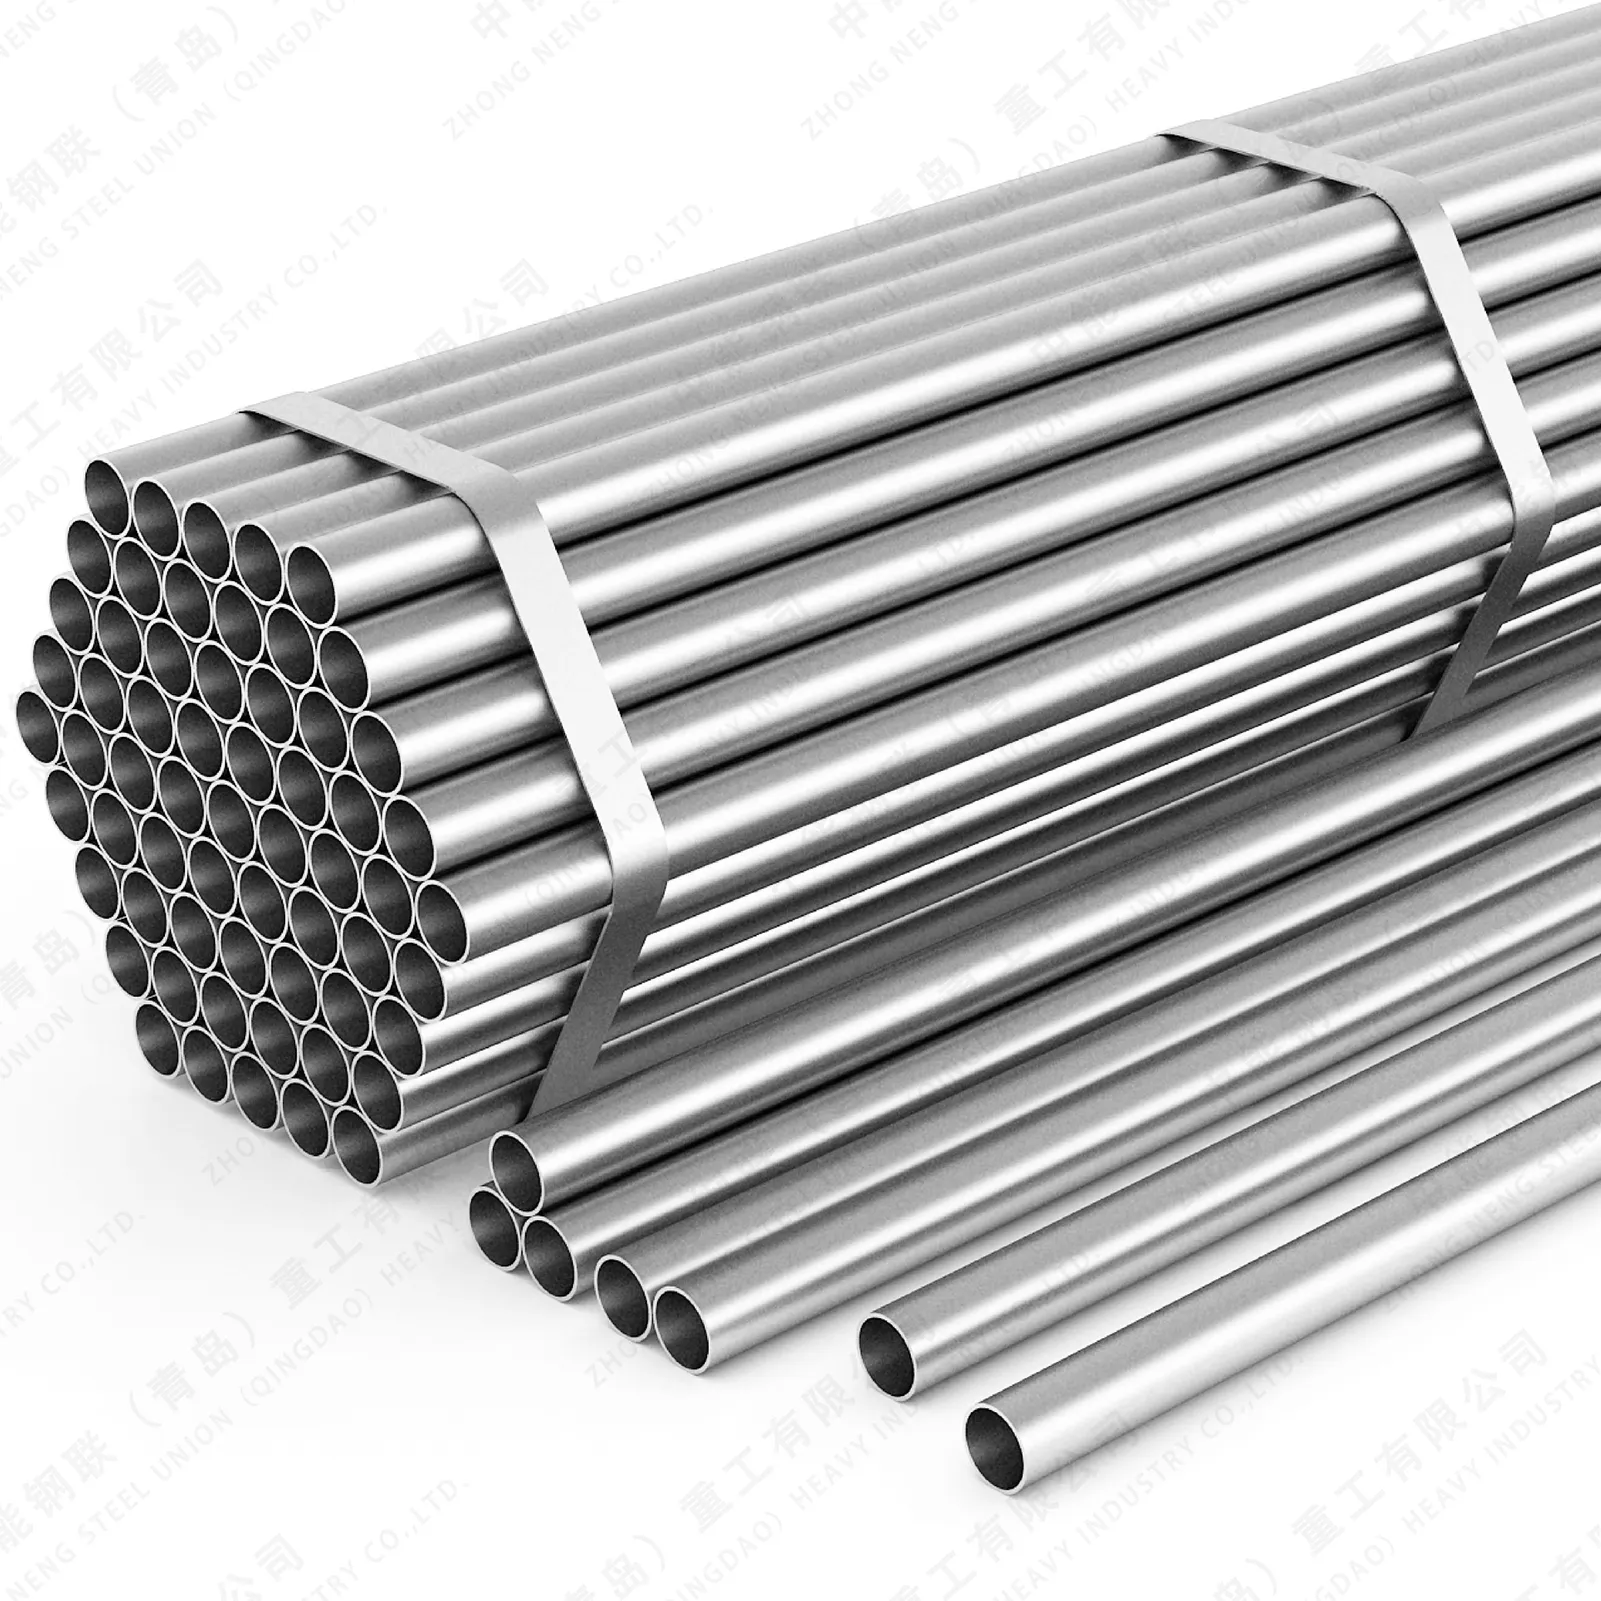 China SUS304 Stainless Steel Pipe Sch10 Stainless Steel 304 Pipe Prices